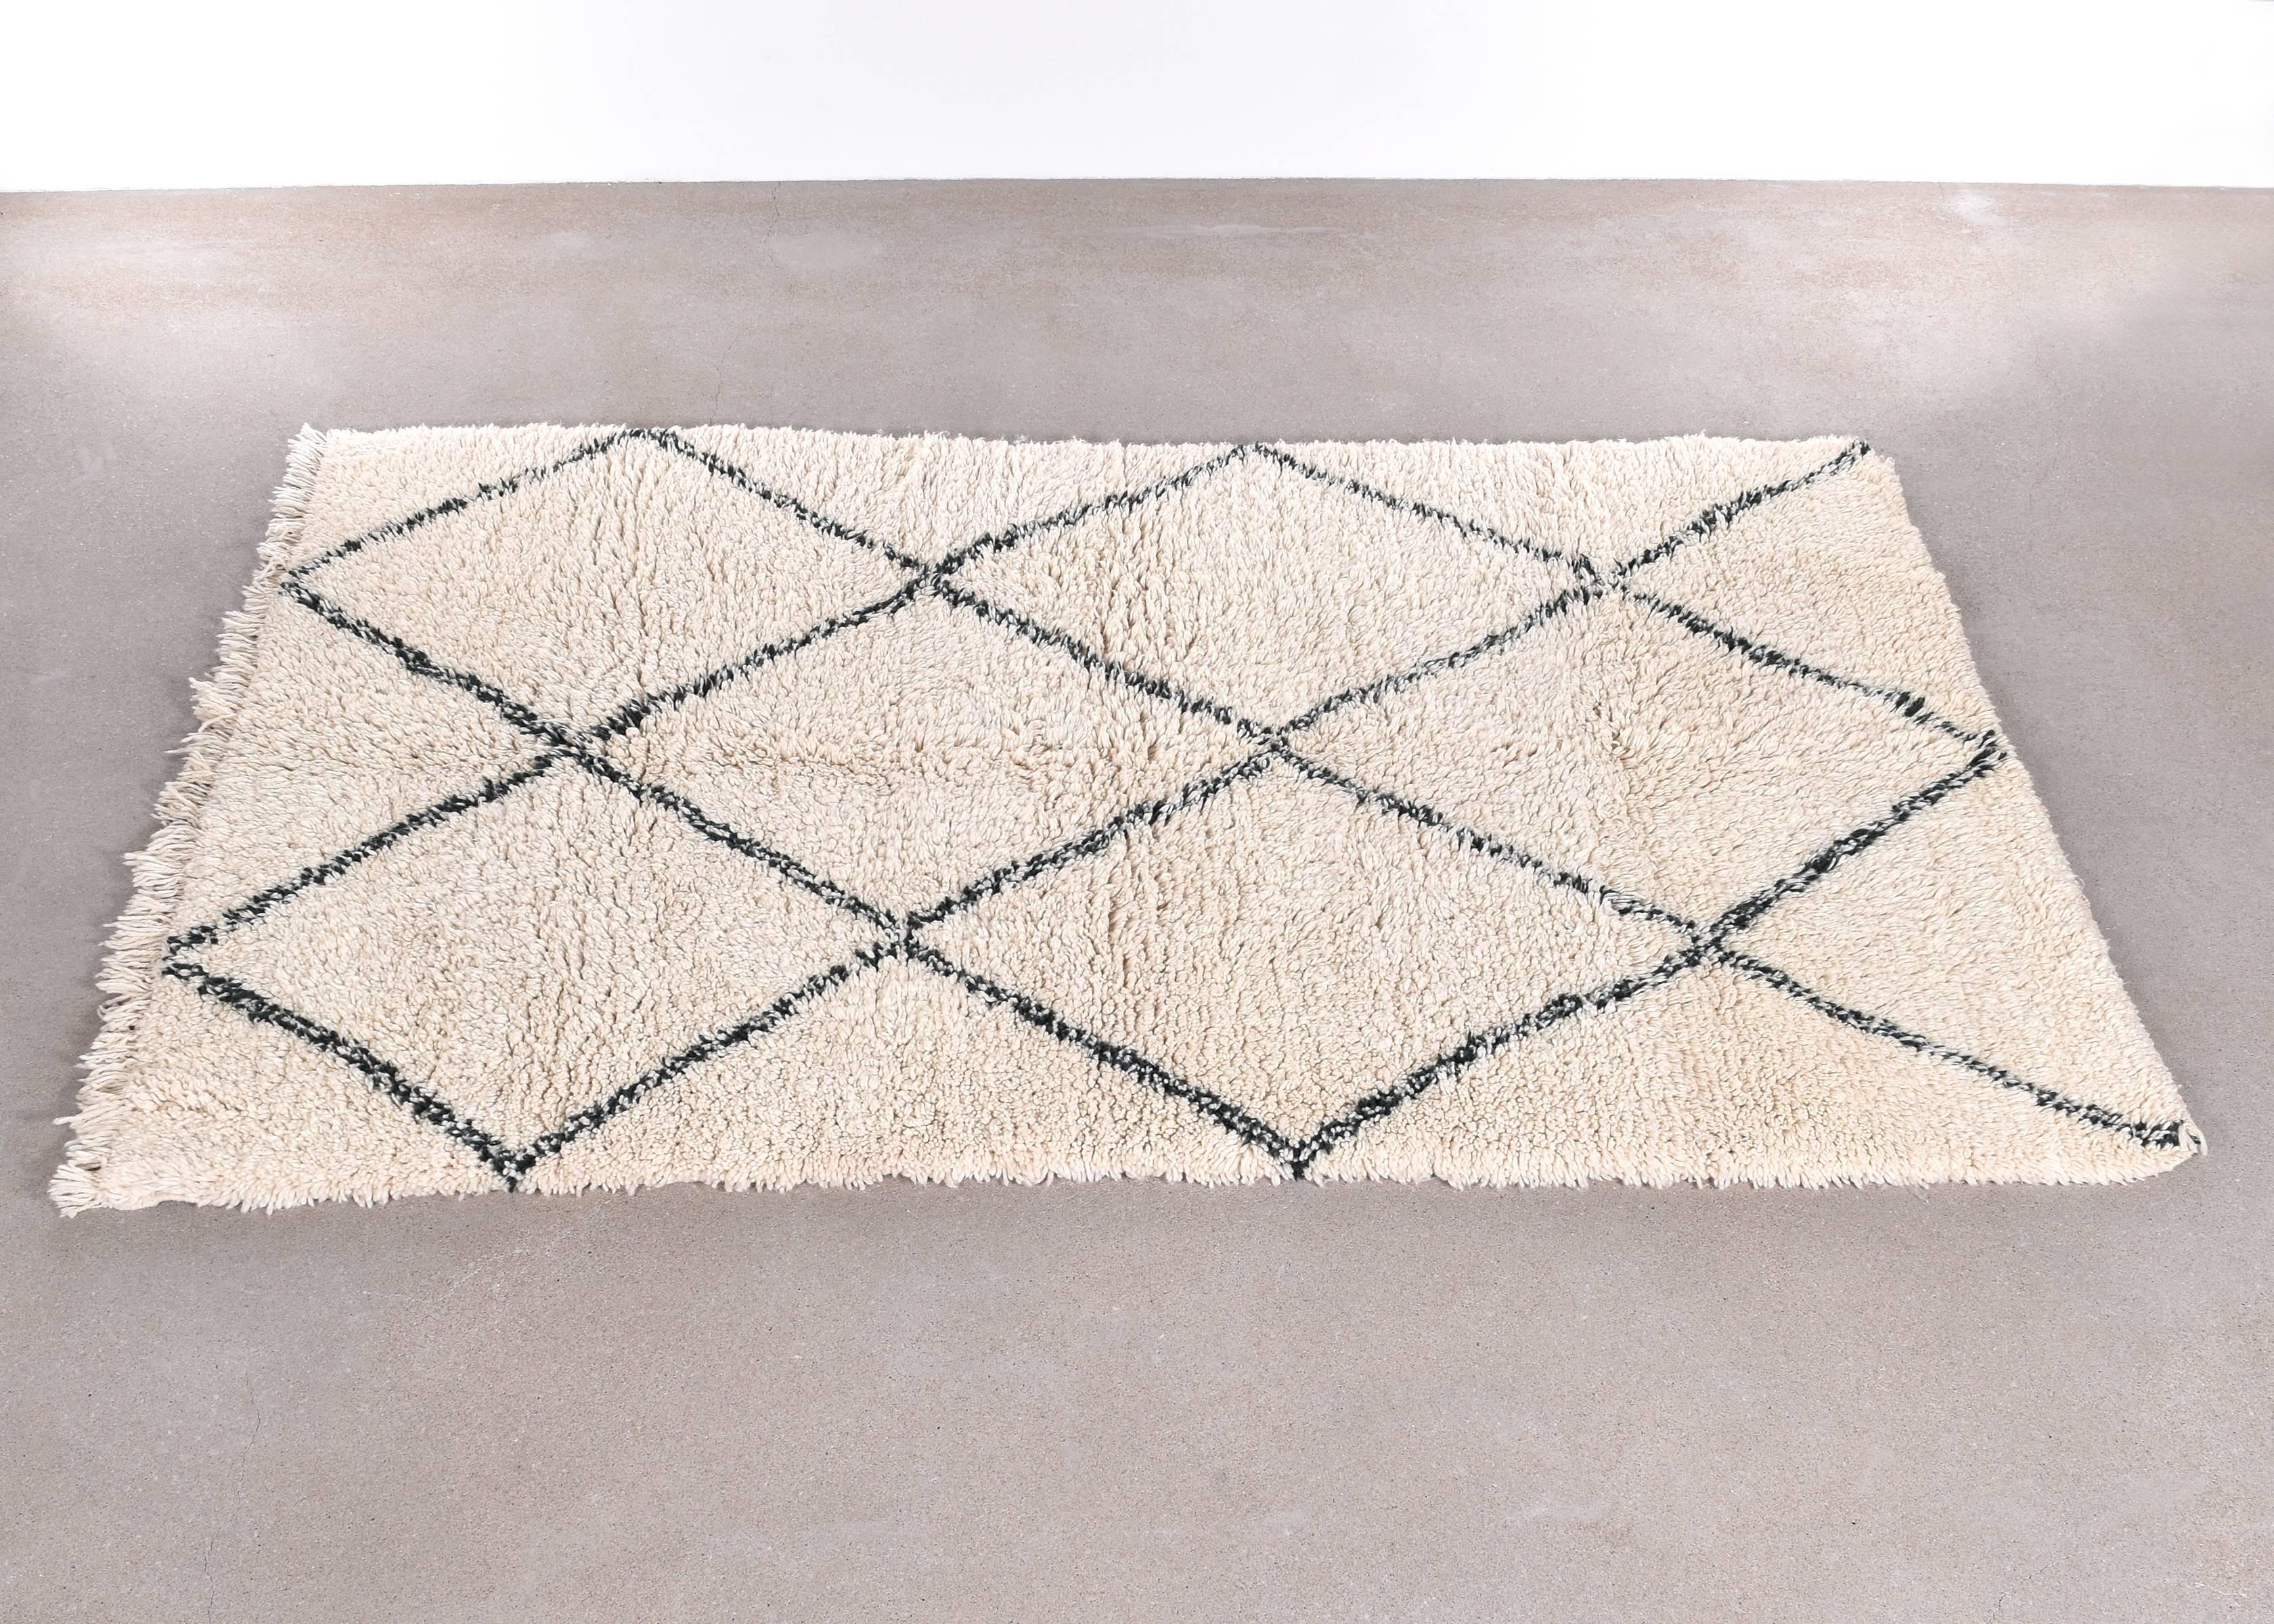 This vintage Beni Ouarain rug is carefully selected in Morocco and has a soft ivory color due to the wool's natural color and are accompanied by dark grey stripes. The rugs are named after the Berber village 'Beni Ouarain' in the Mid-Atlas mountain